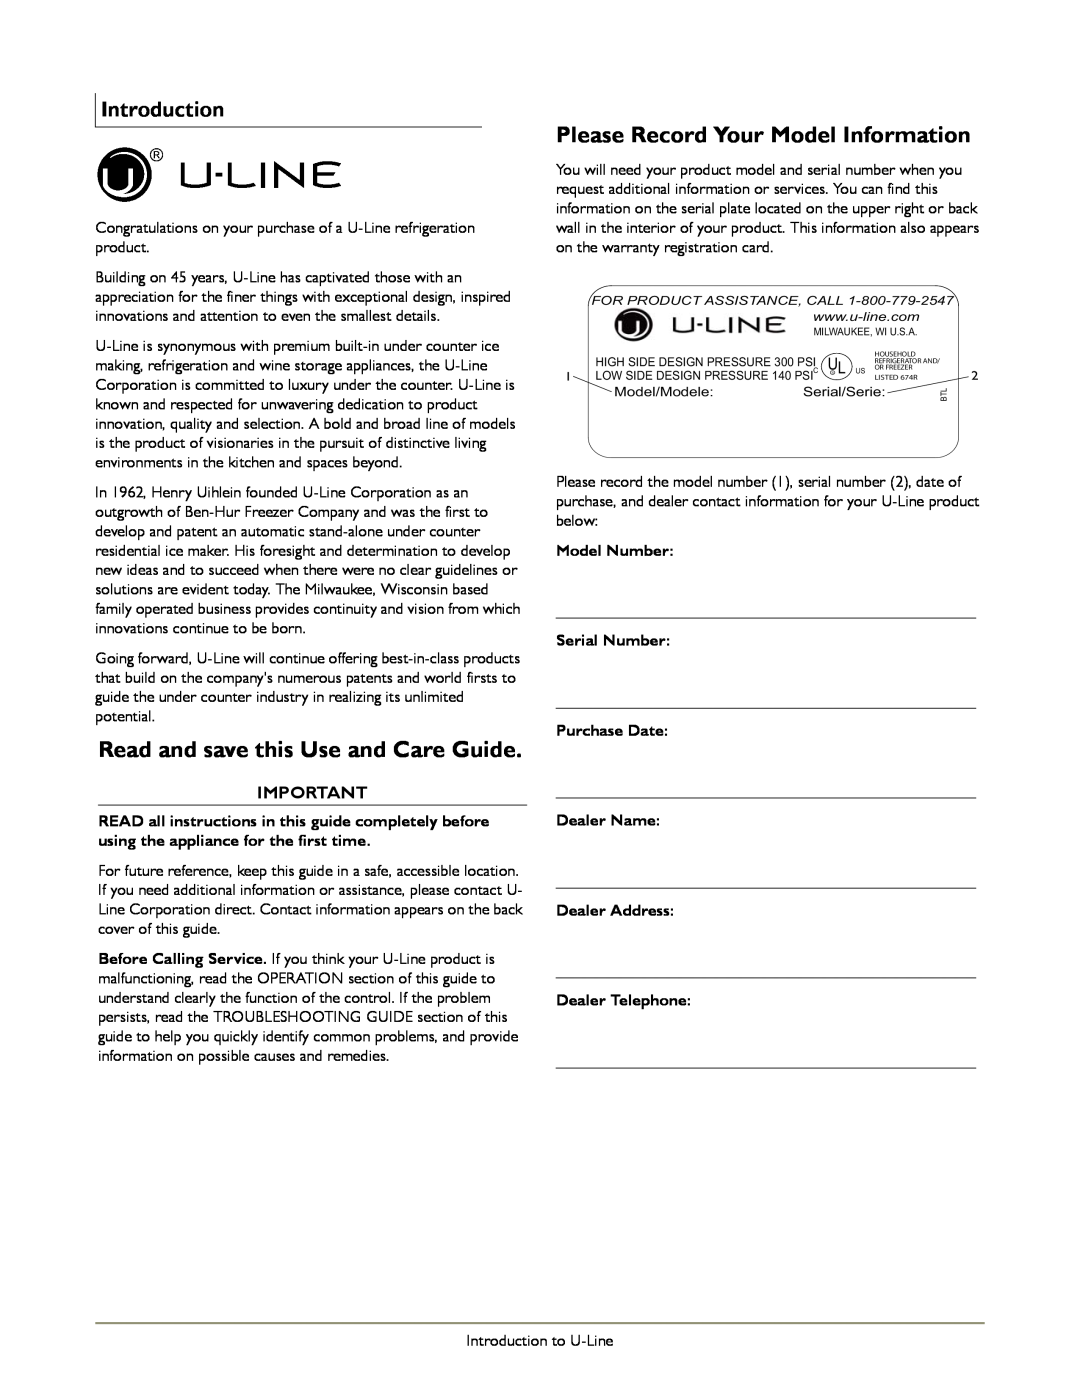 U-Line 2115RS Read and save this Use and Care Guide, Please Record Your Model Information, Introduction, Model Number 